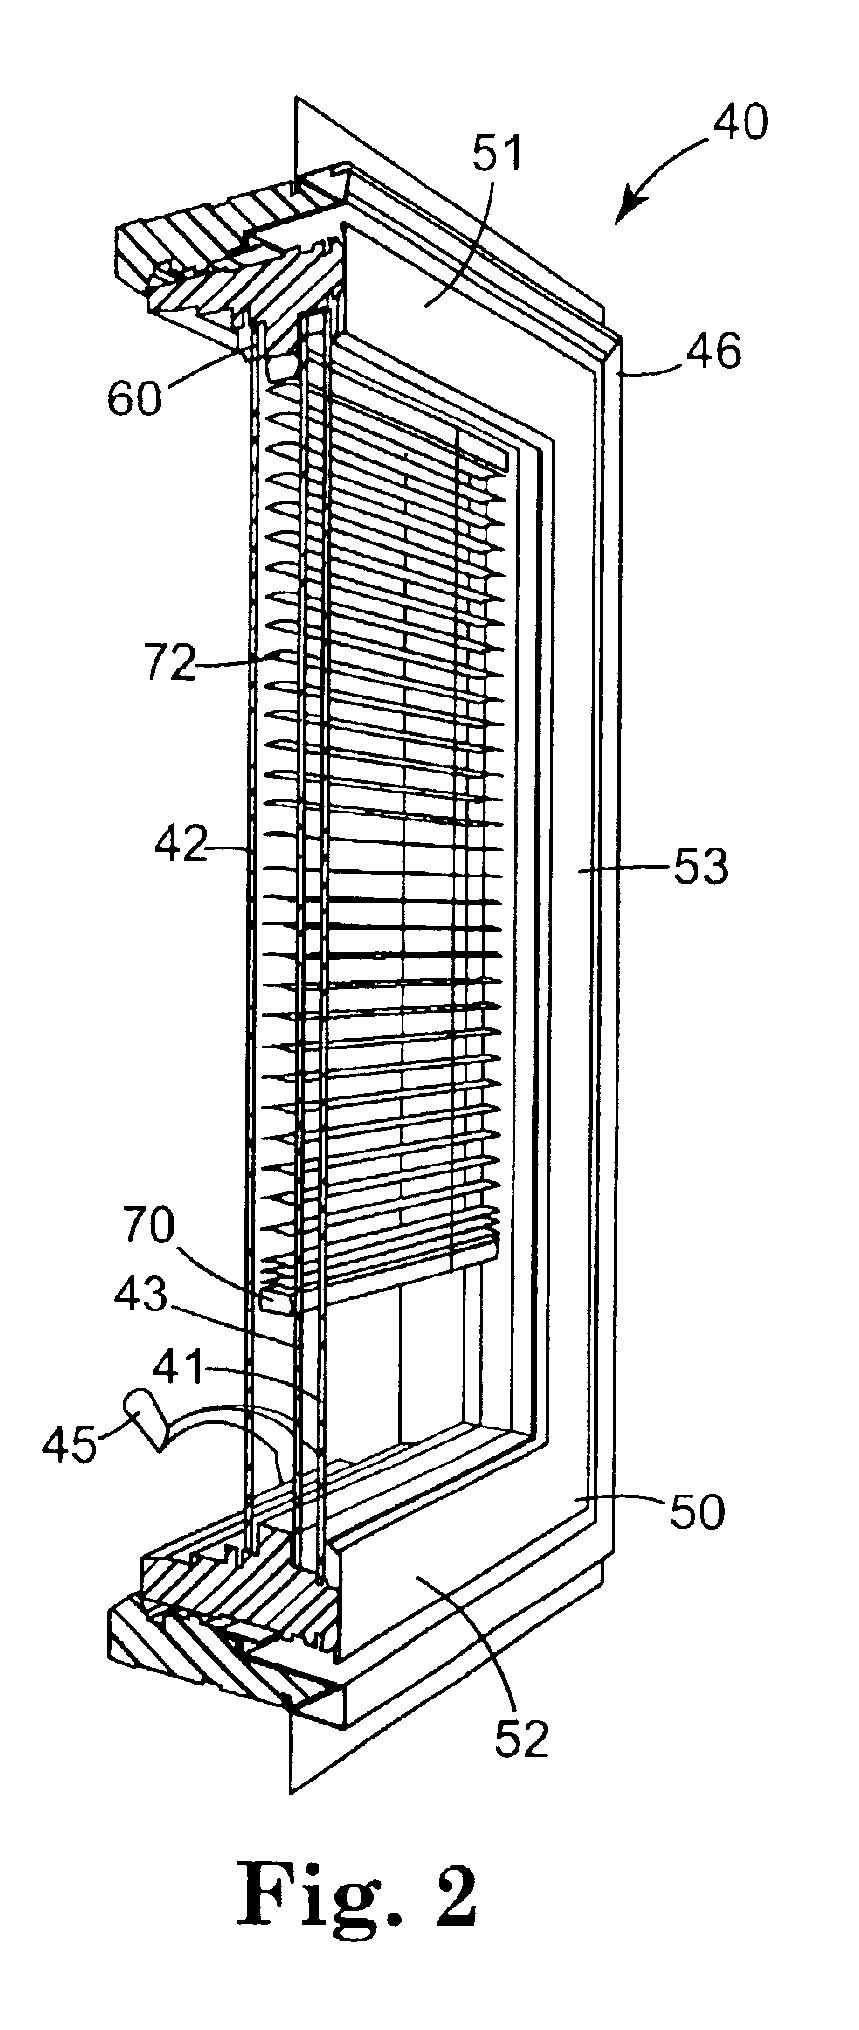 One-way drive for window coverings